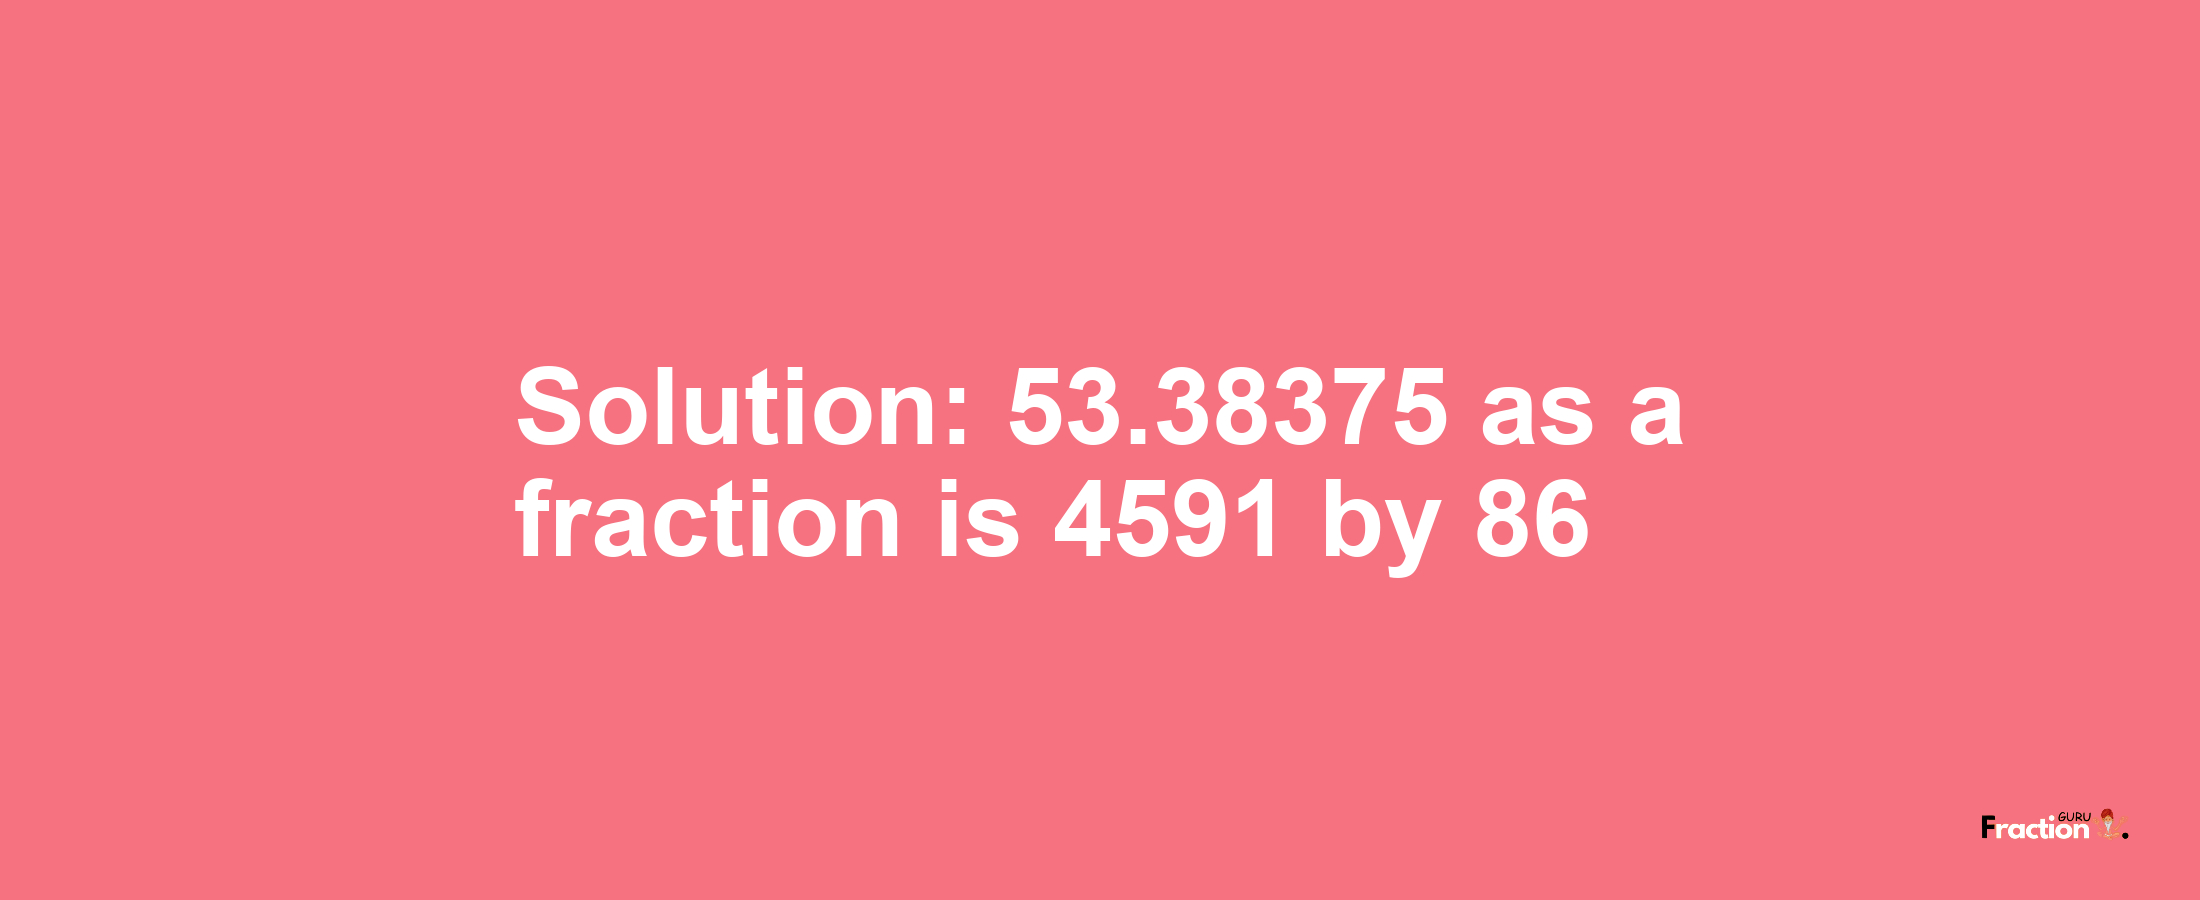 Solution:53.38375 as a fraction is 4591/86